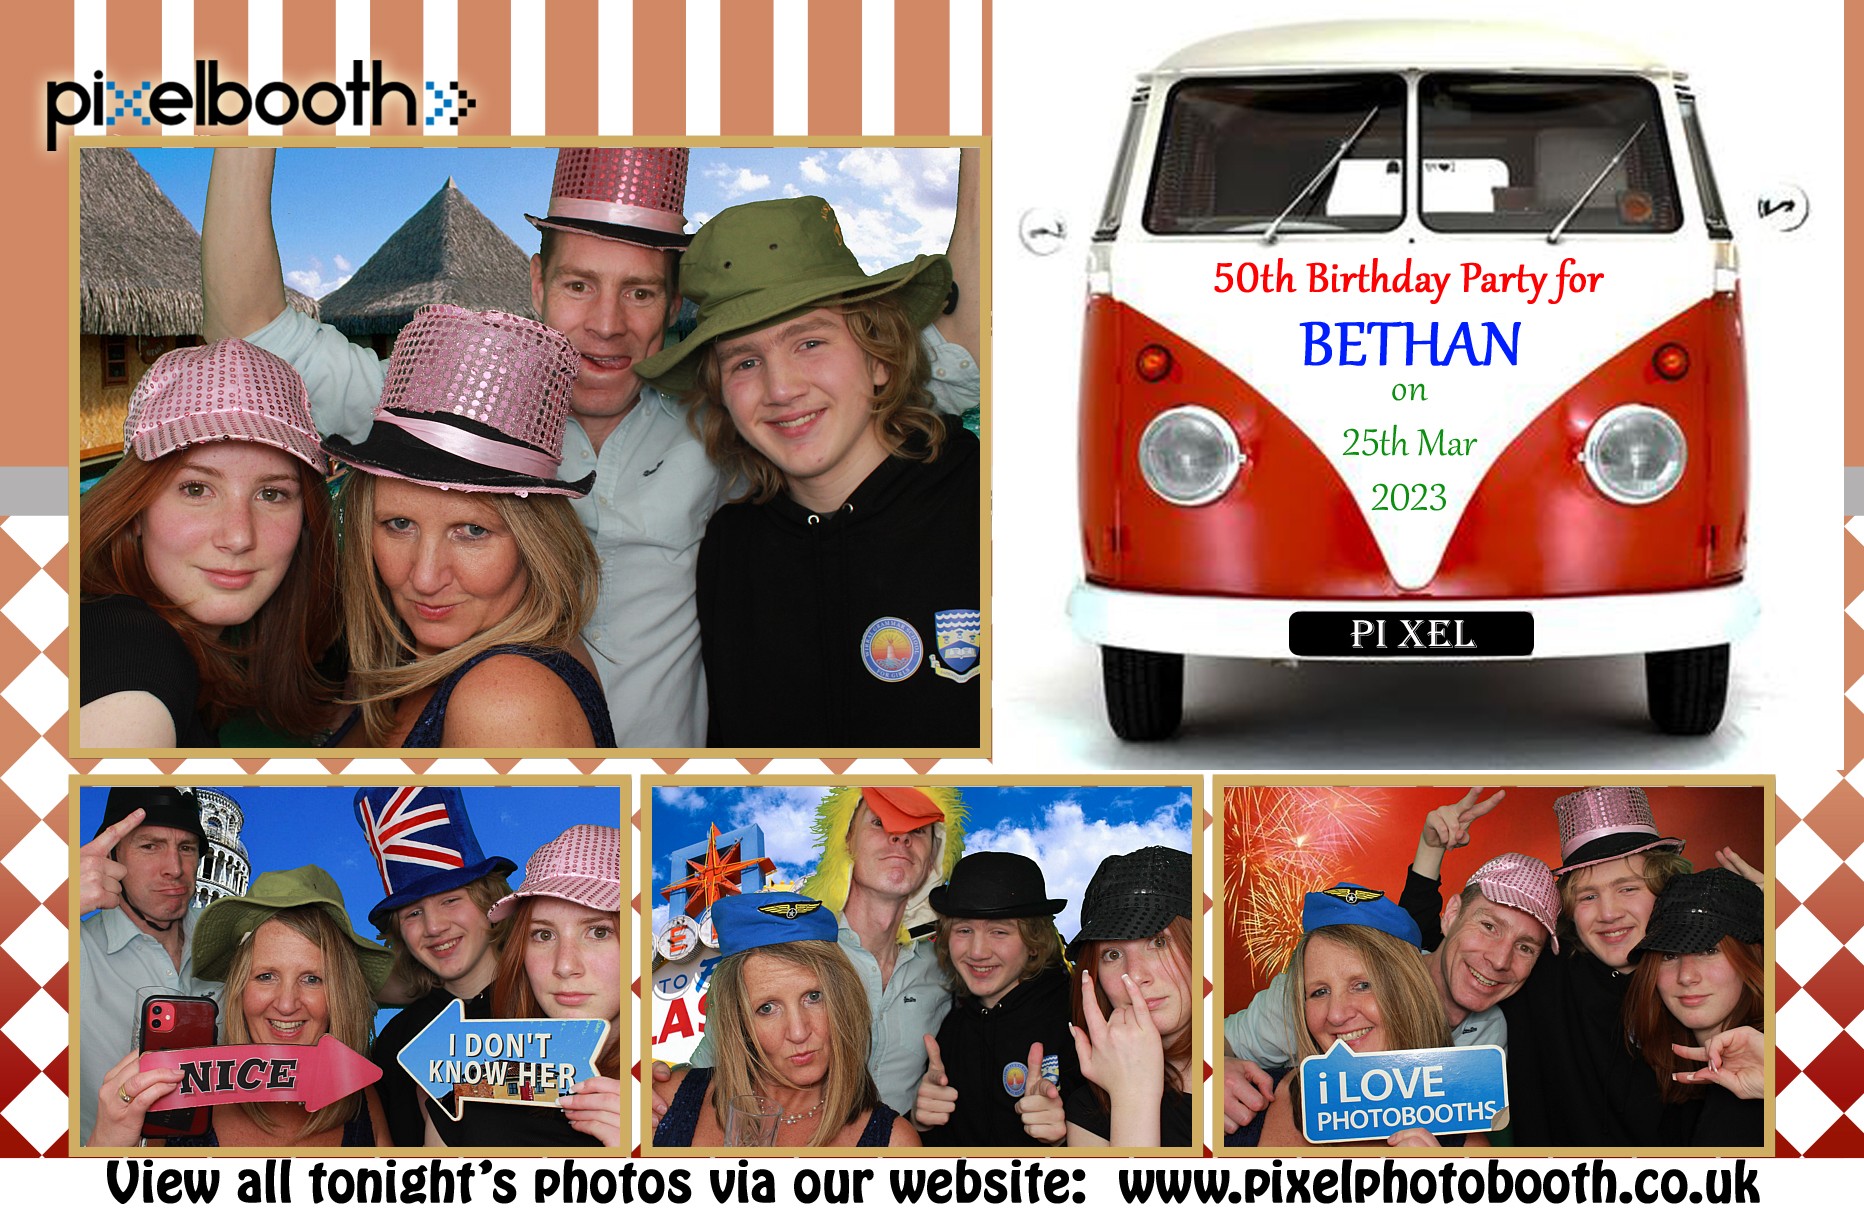 25th March 2023: Bethan's 50th Birthday Party at Heswall Hall